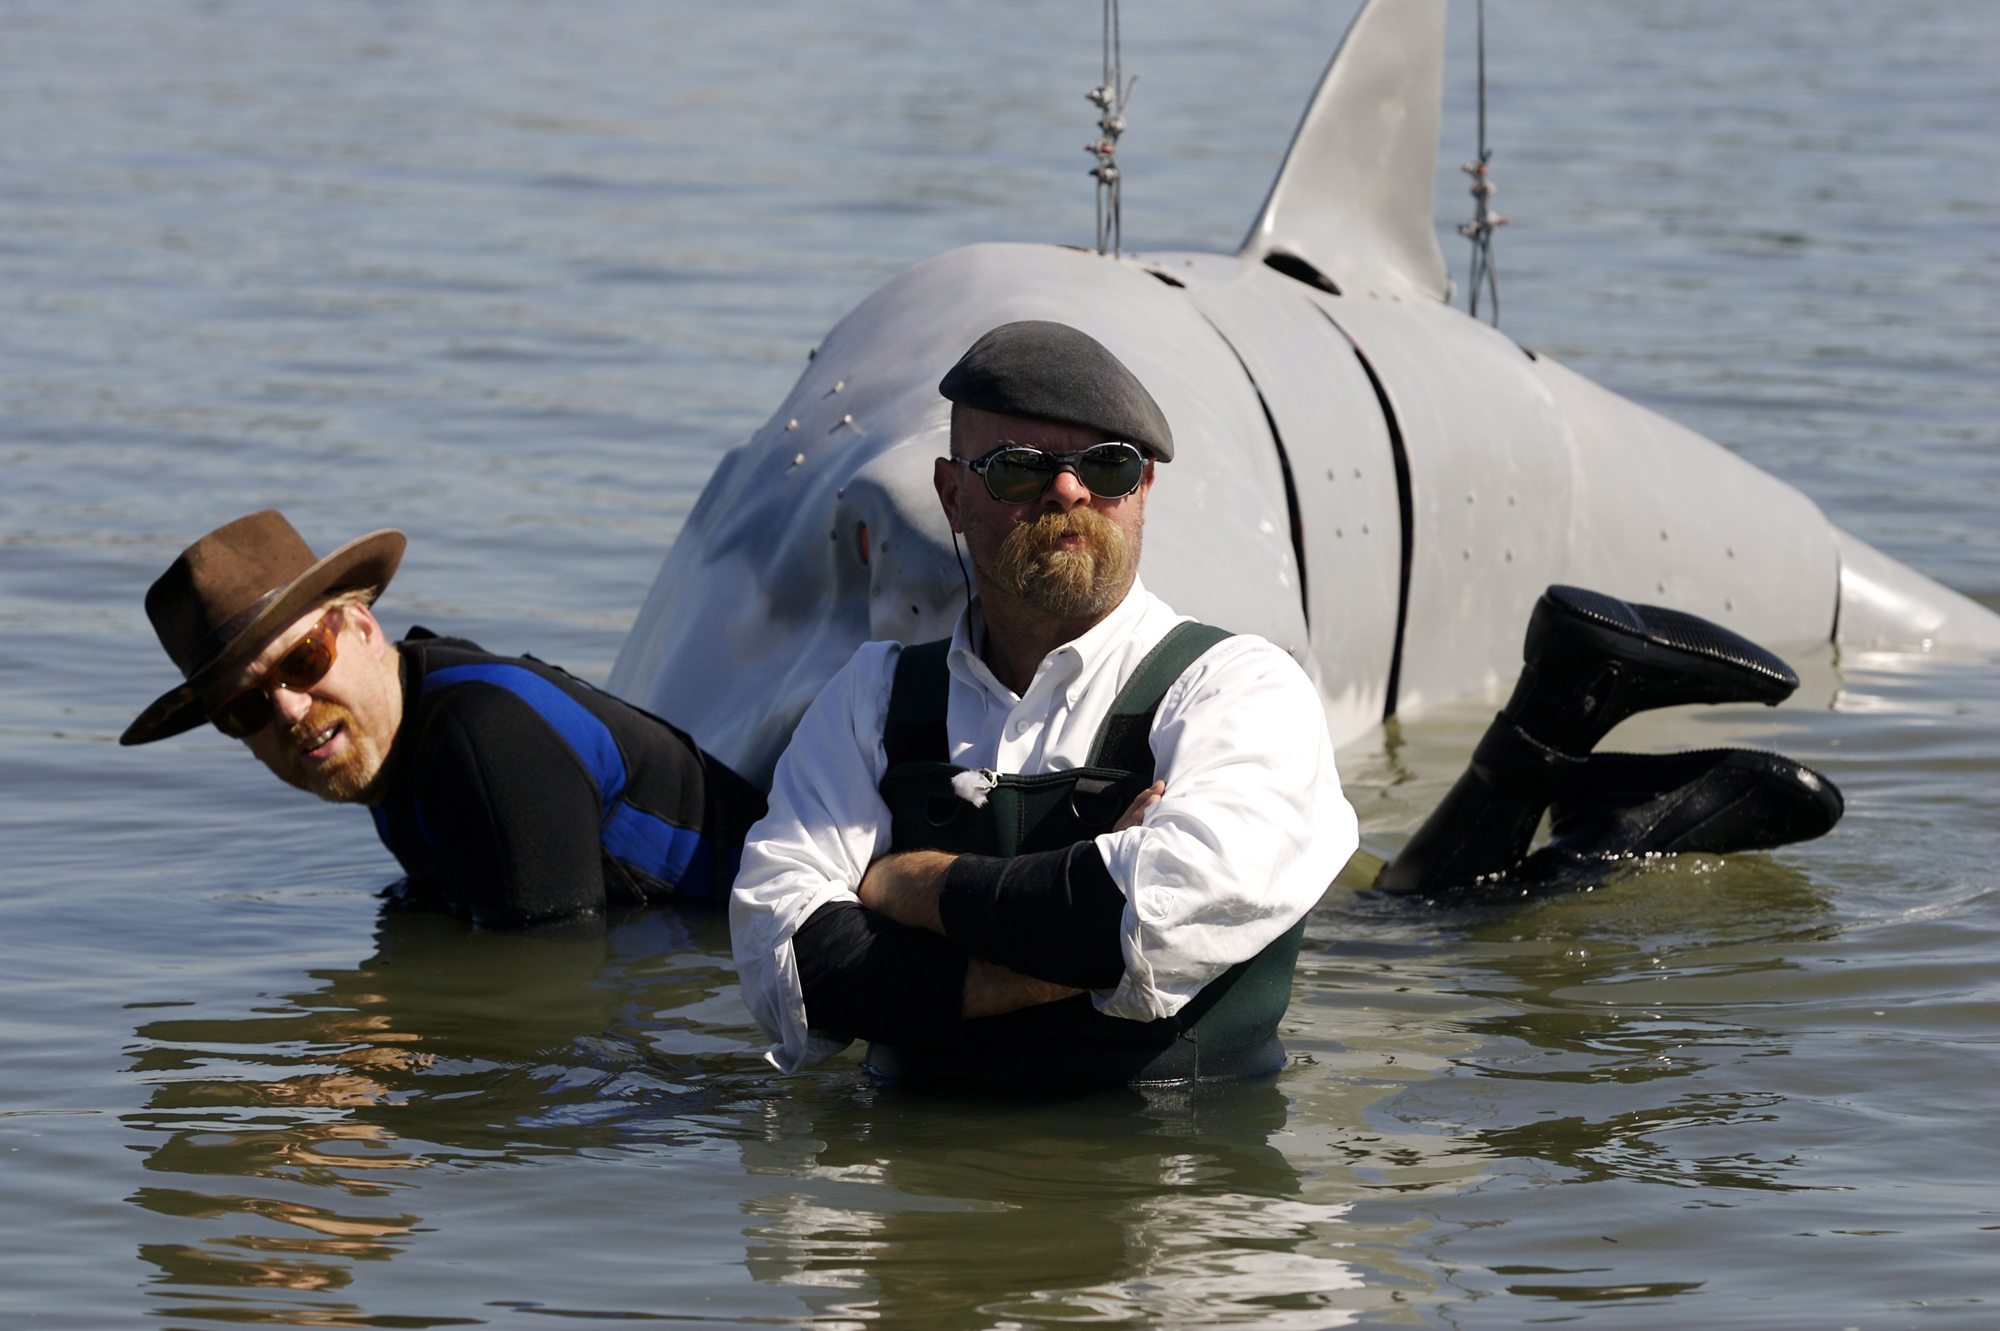 &quot;Mythbusters&quot; hosts Adam Savage and Jamie Hyneman demonstrate the power of a shark&#039;s bite at the Encinal Boat Launch in Alameda, Calif. The pair were in Oregon last year shooting an episode that aired Saturday.